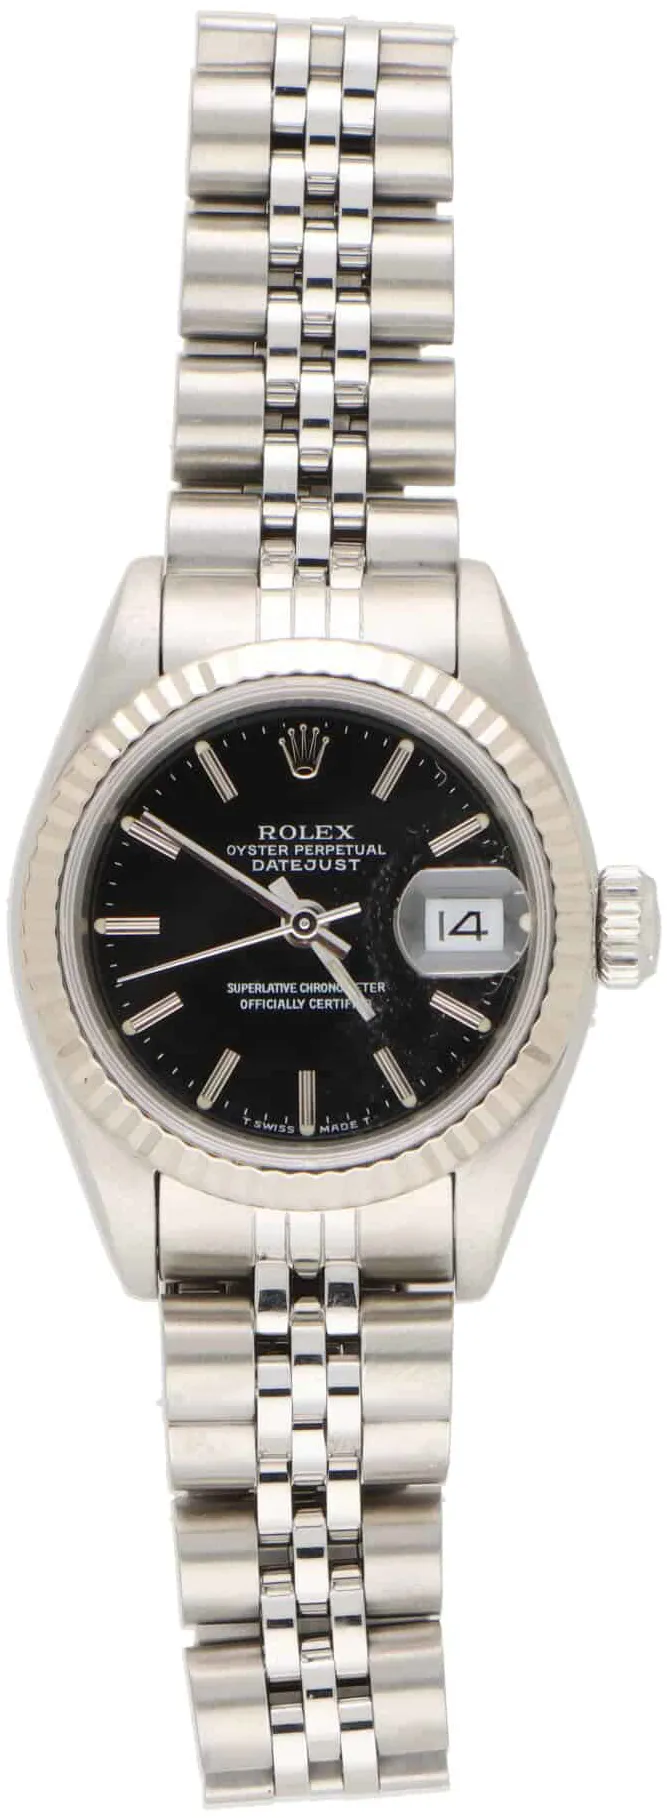 Rolex Oyster Perpetual "Datejust" 69174 26mm Stainless steel Black